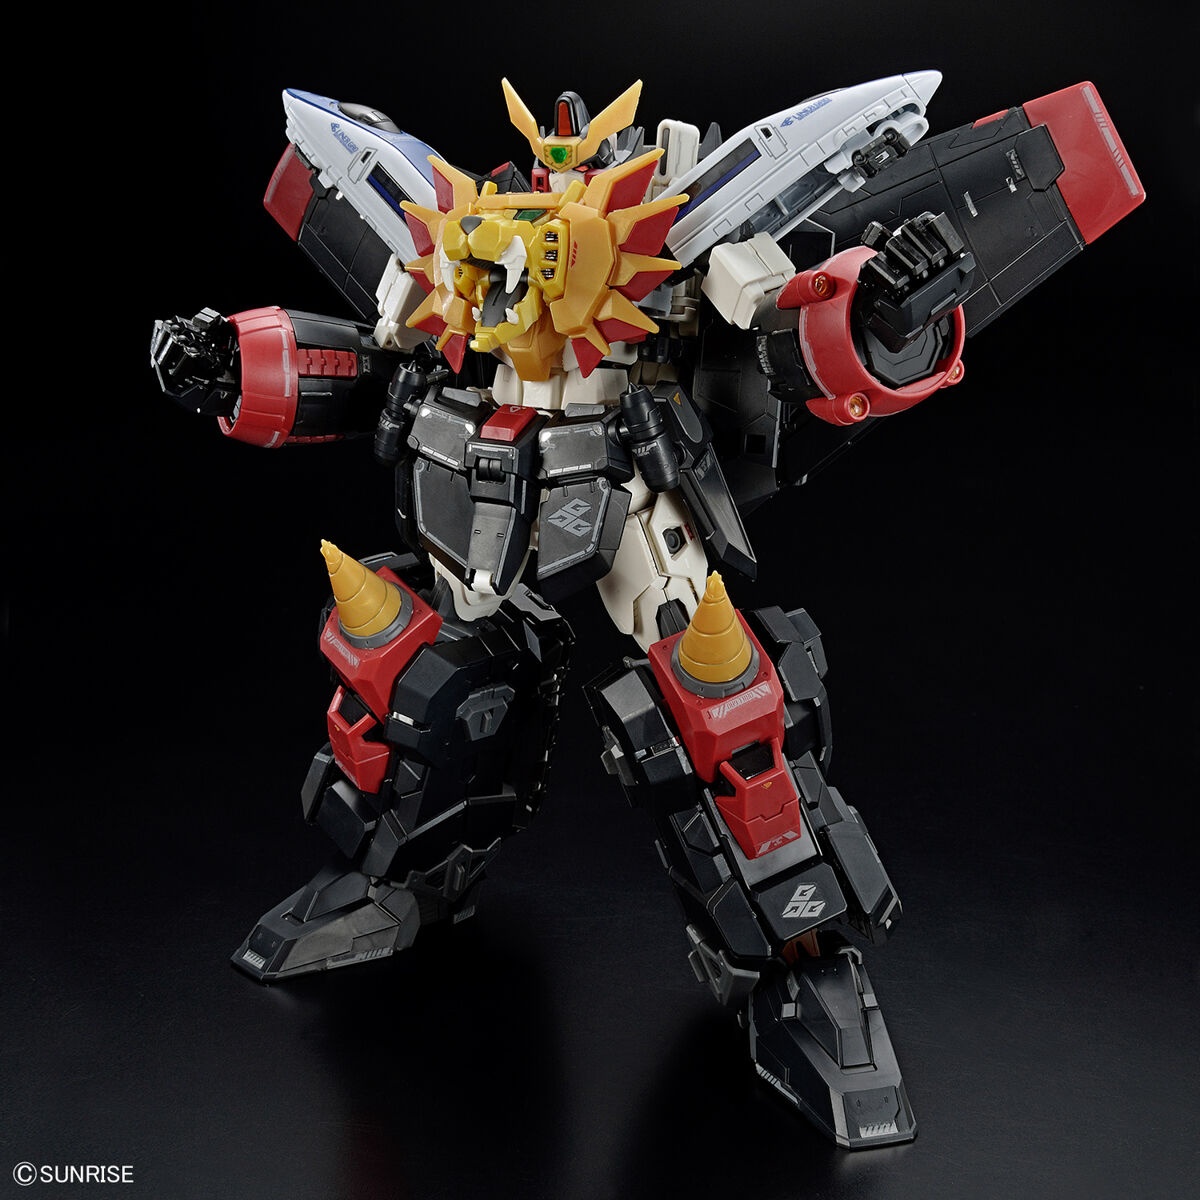 King of the Braves Gaogaigar